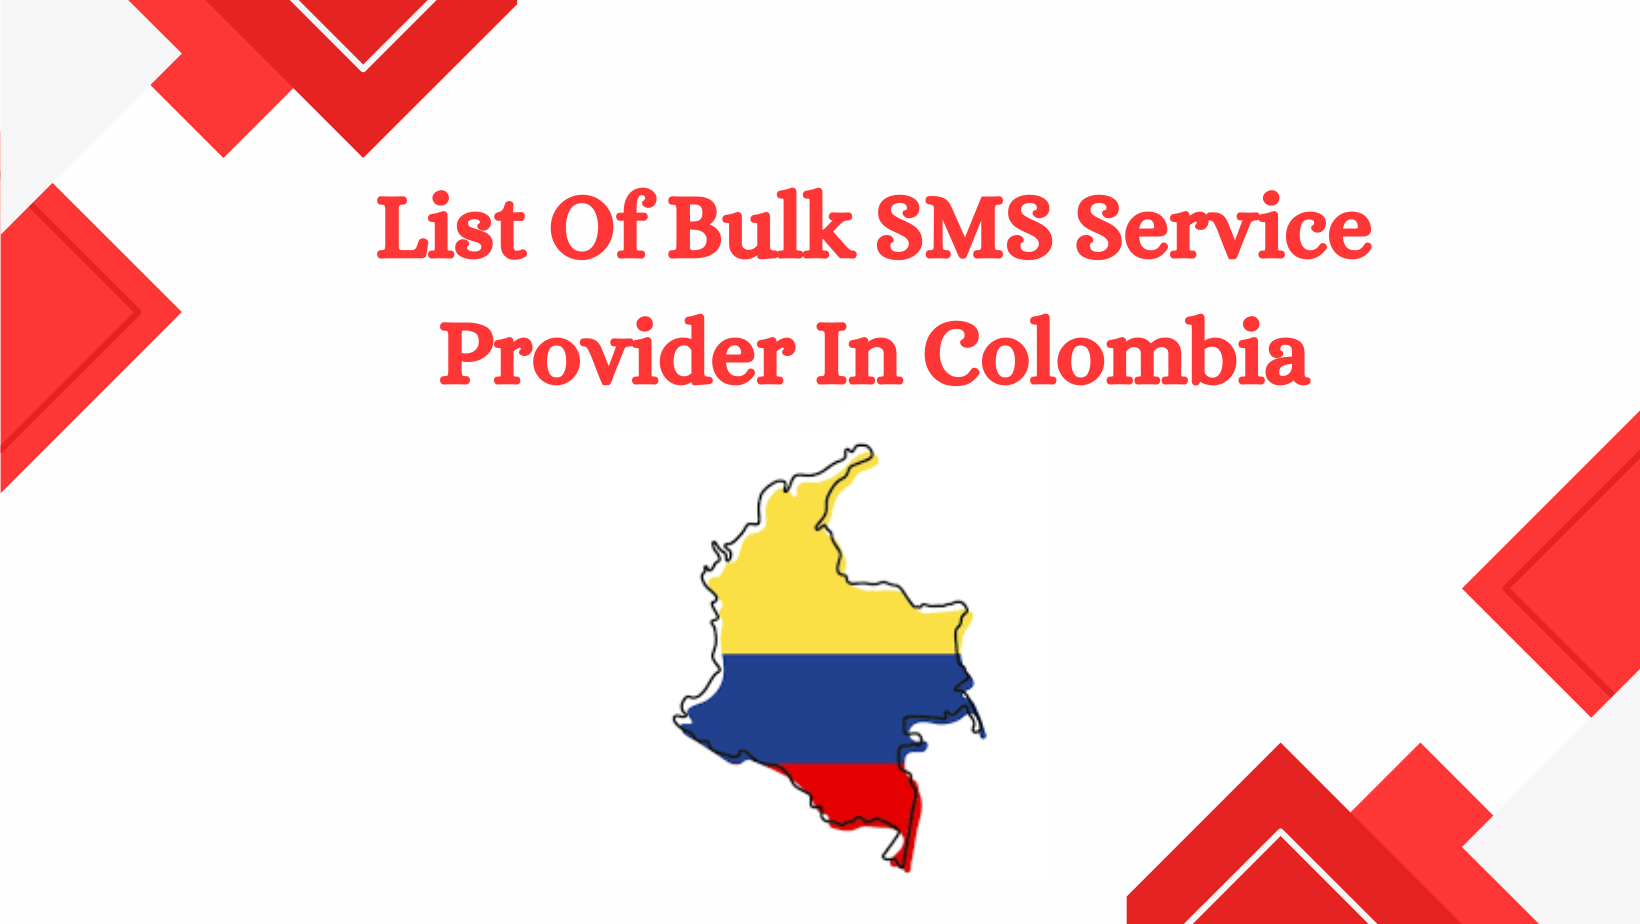 List Of Bulk SMS Service Provider In Colombia